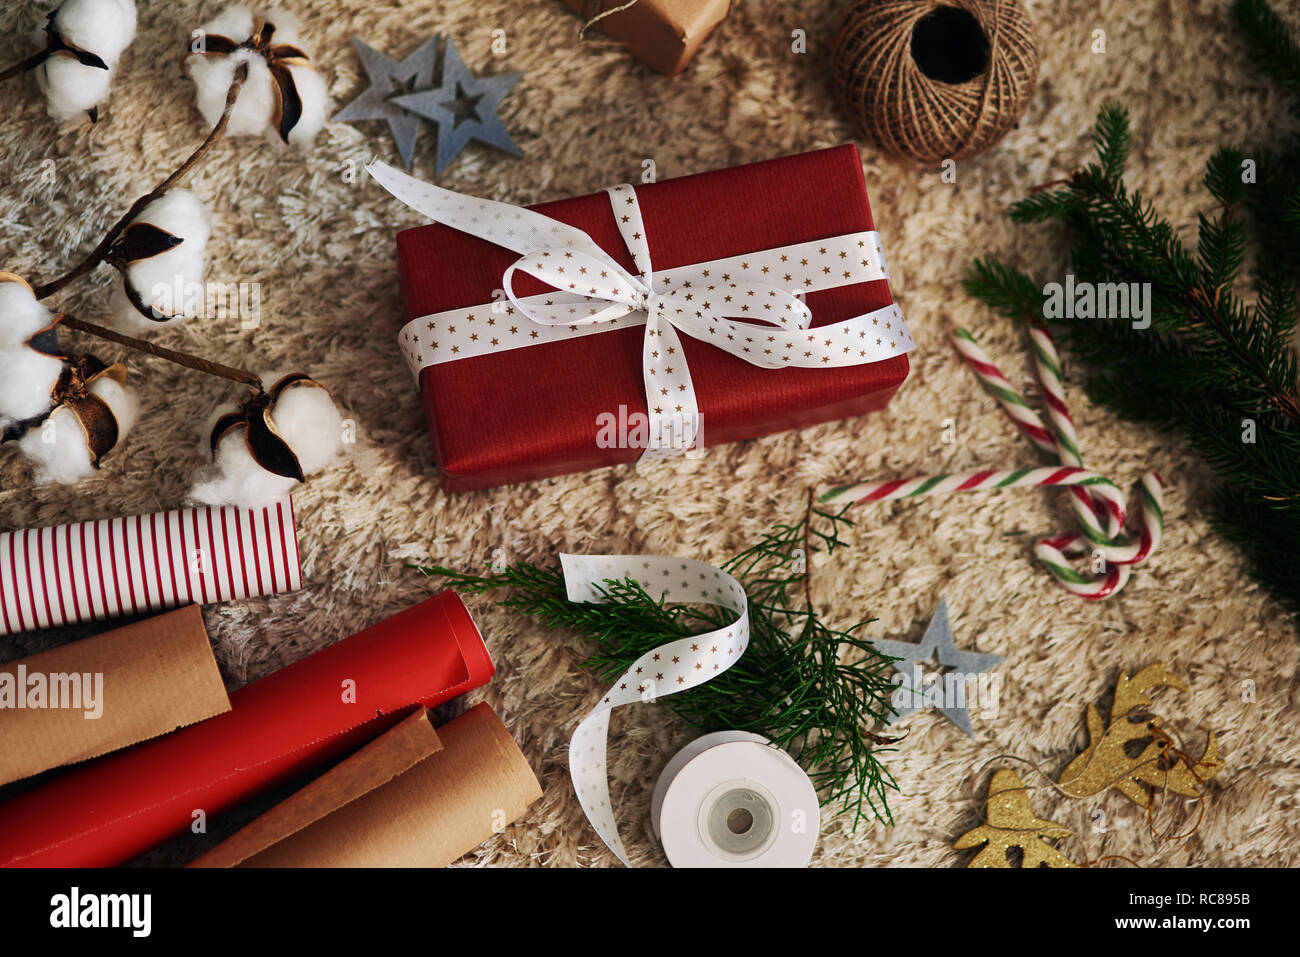 Christmas present, wrapping paper, string and bells on rug Stock Photo